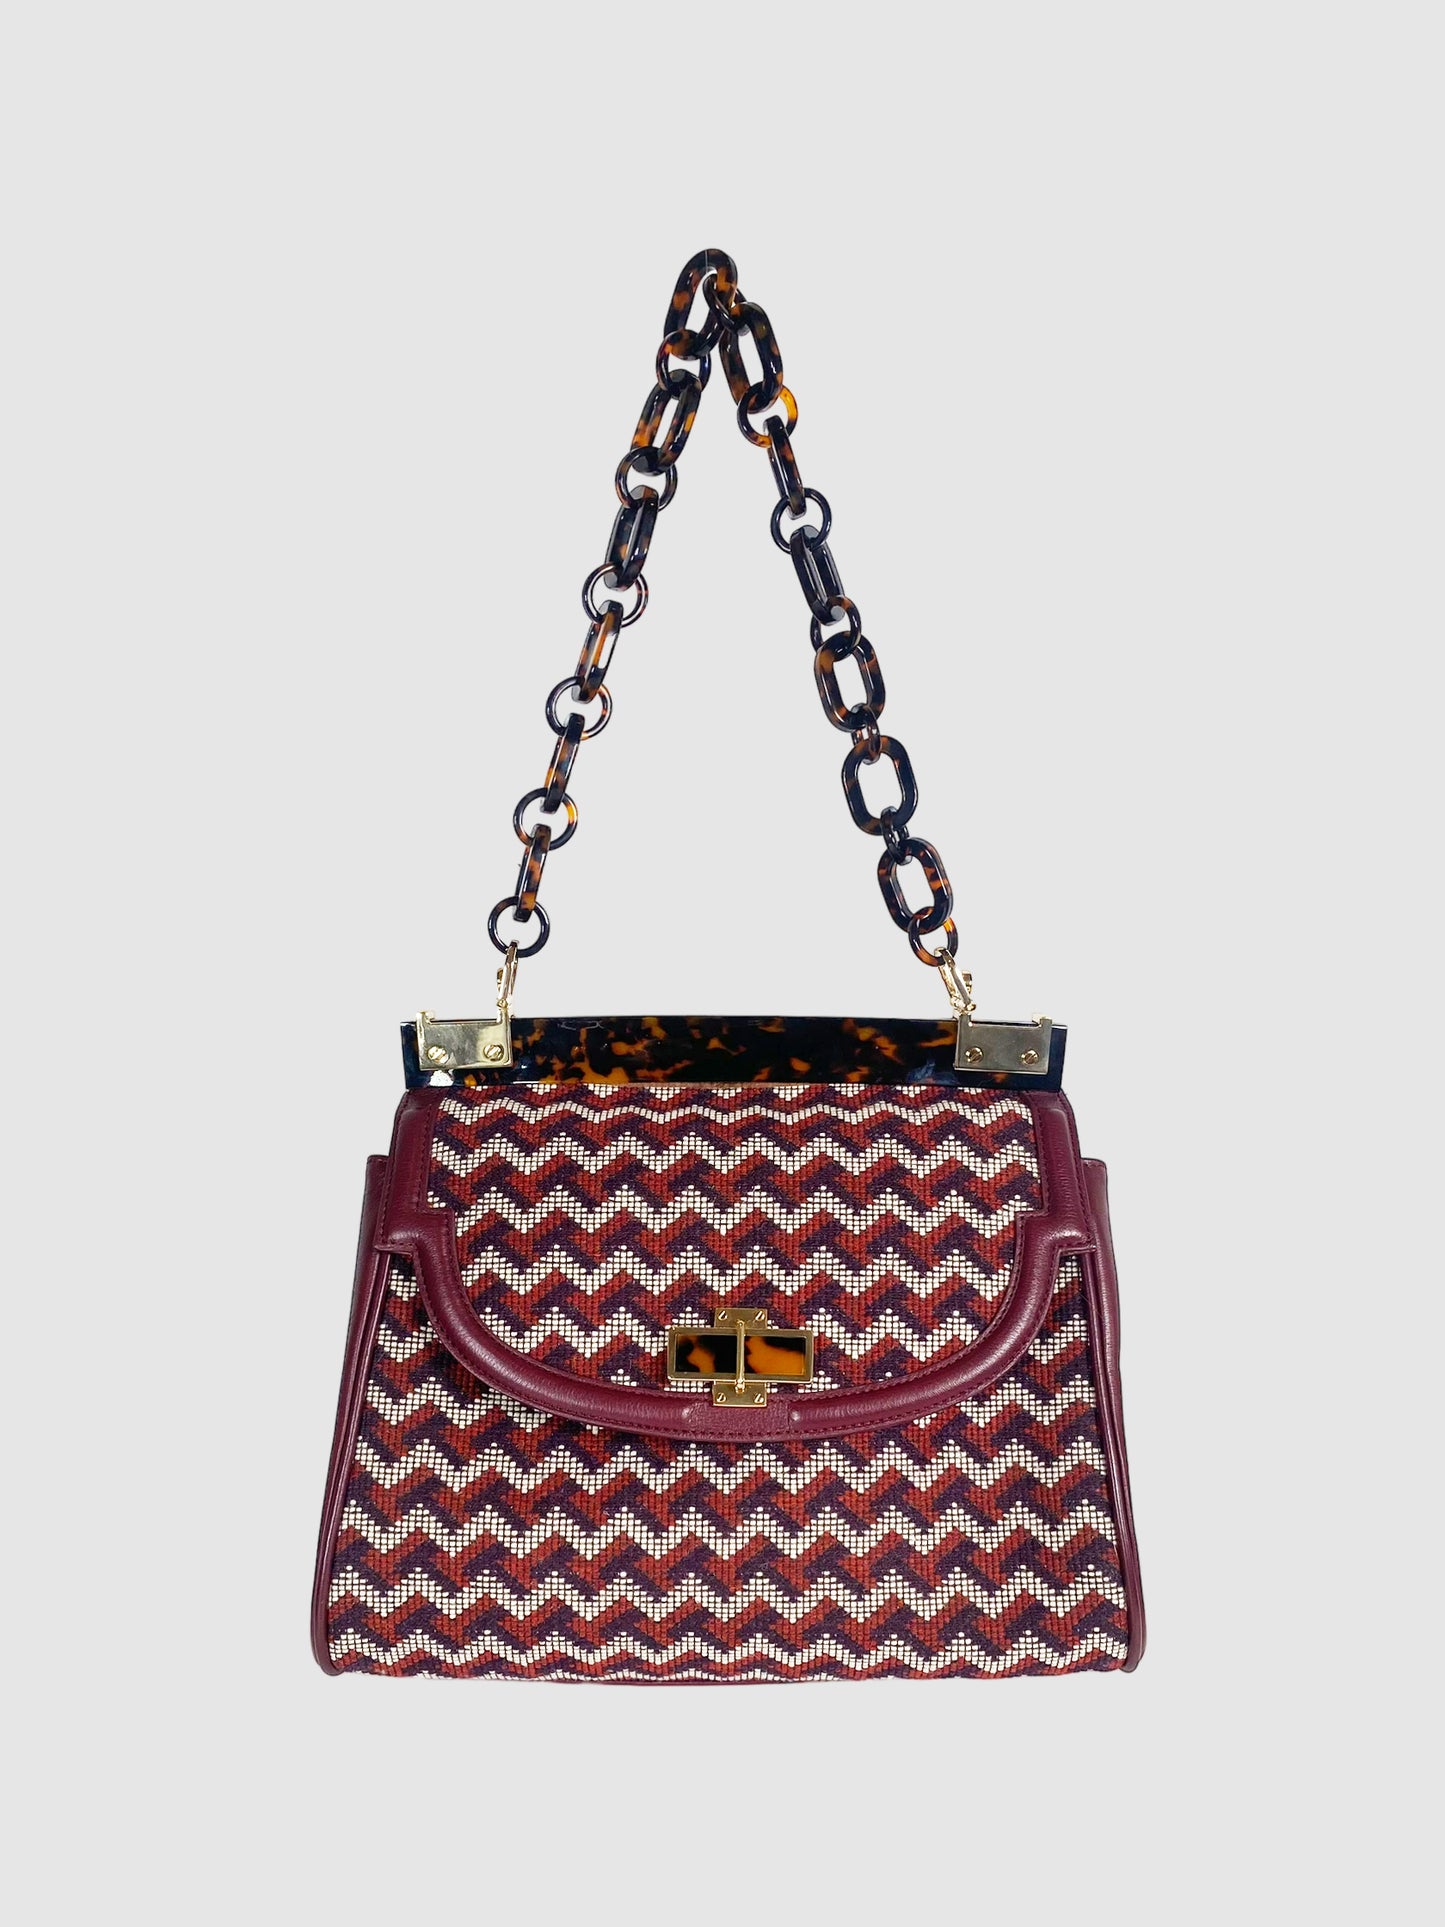 Tory Burch Woven and Leather Shoulder Bag